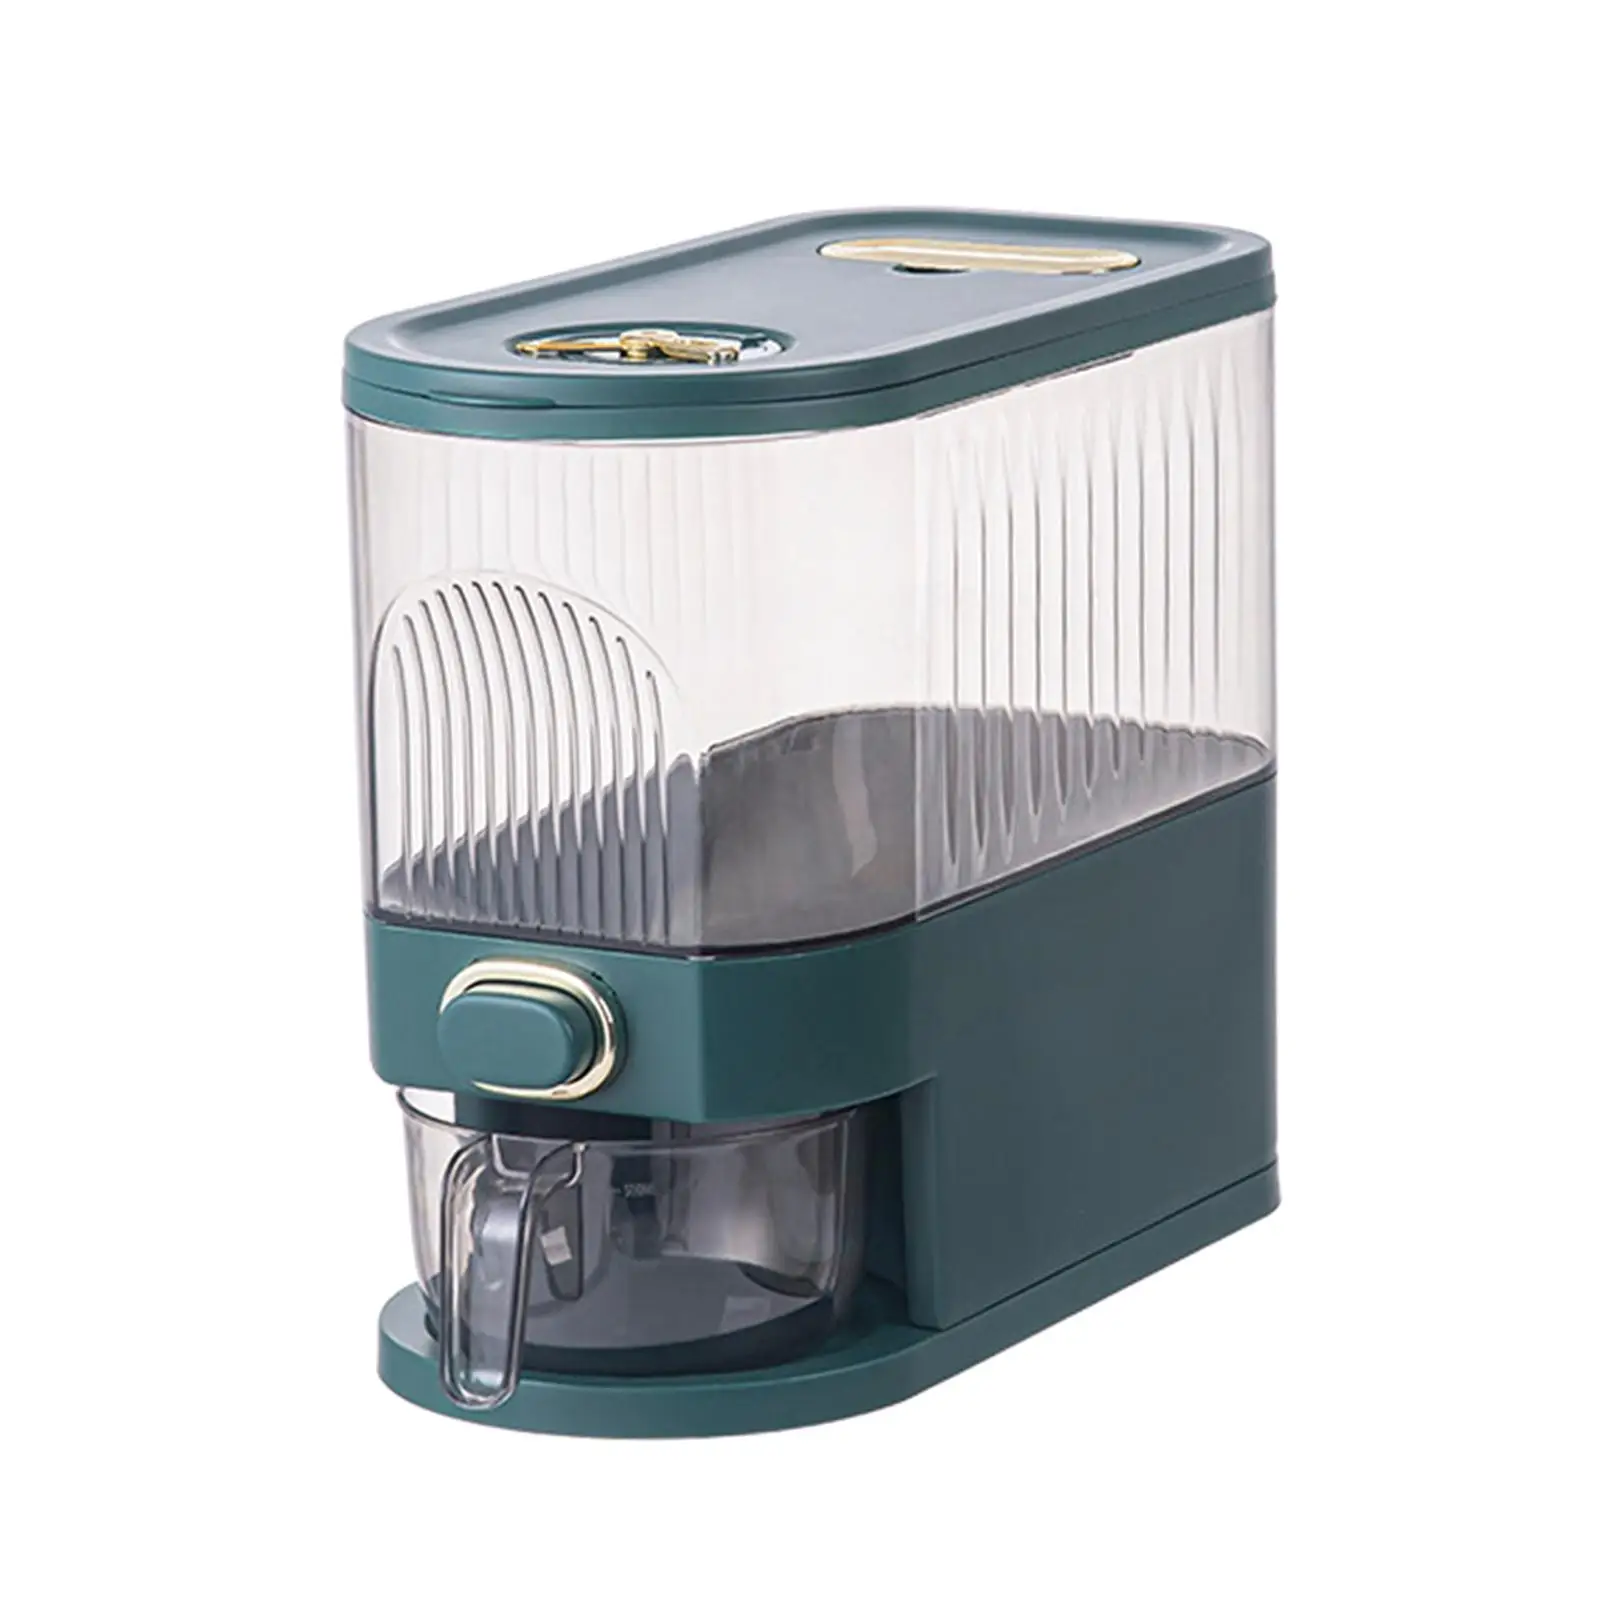 Rice Dispenser Sealed Rice Container, Rice Bucket, Food Storge Container for Grain, Rice, Flour ,Dry Food, Household